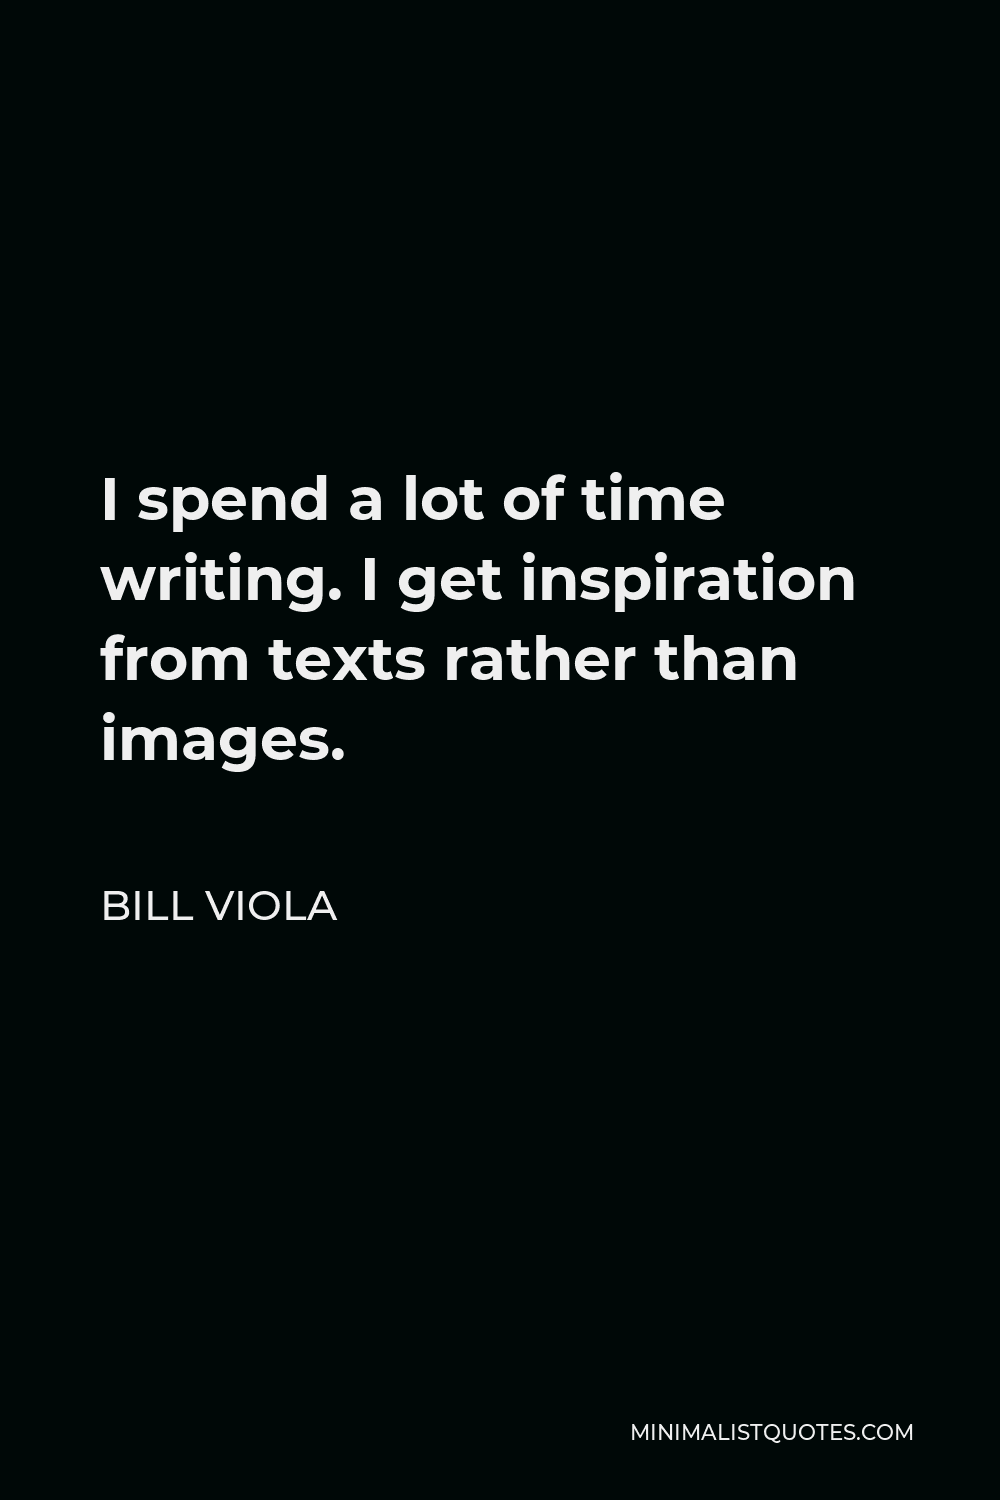 Bill Viola Quote - I spend a lot of time writing. I get inspiration from texts rather than images.